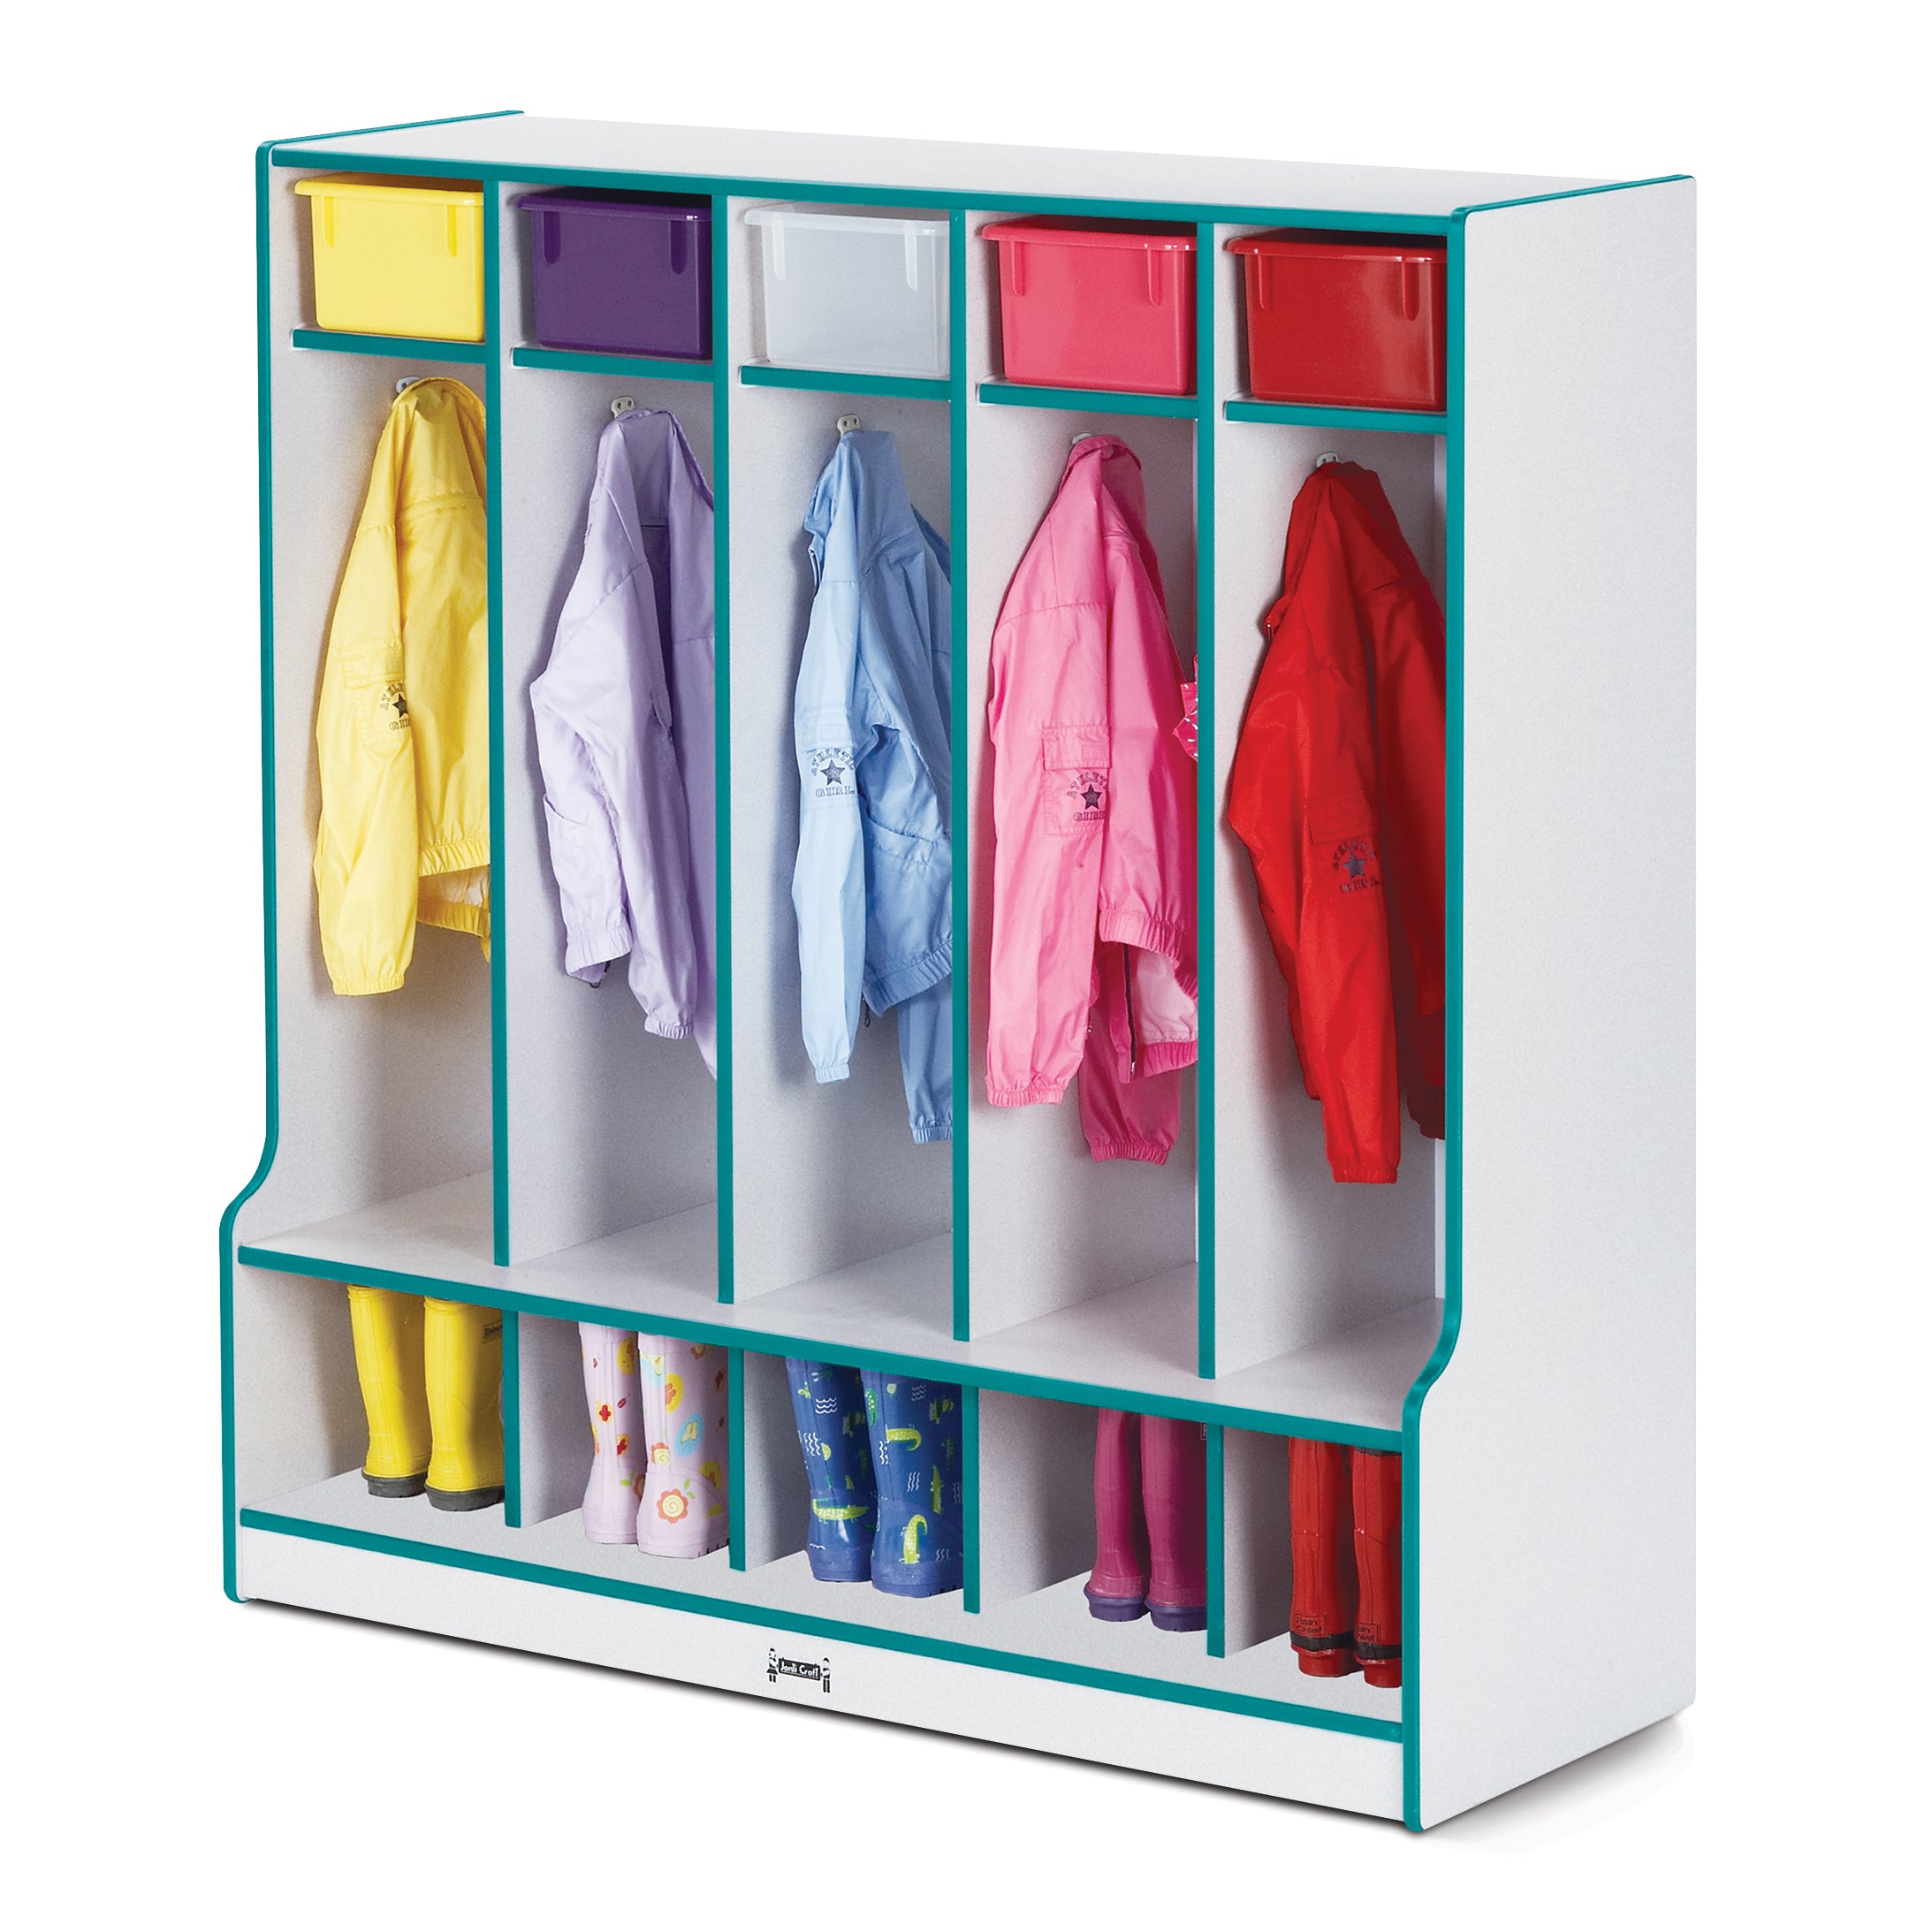 0468JCWW005, Rainbow Accents 5 Section Coat Locker with Step - Teal